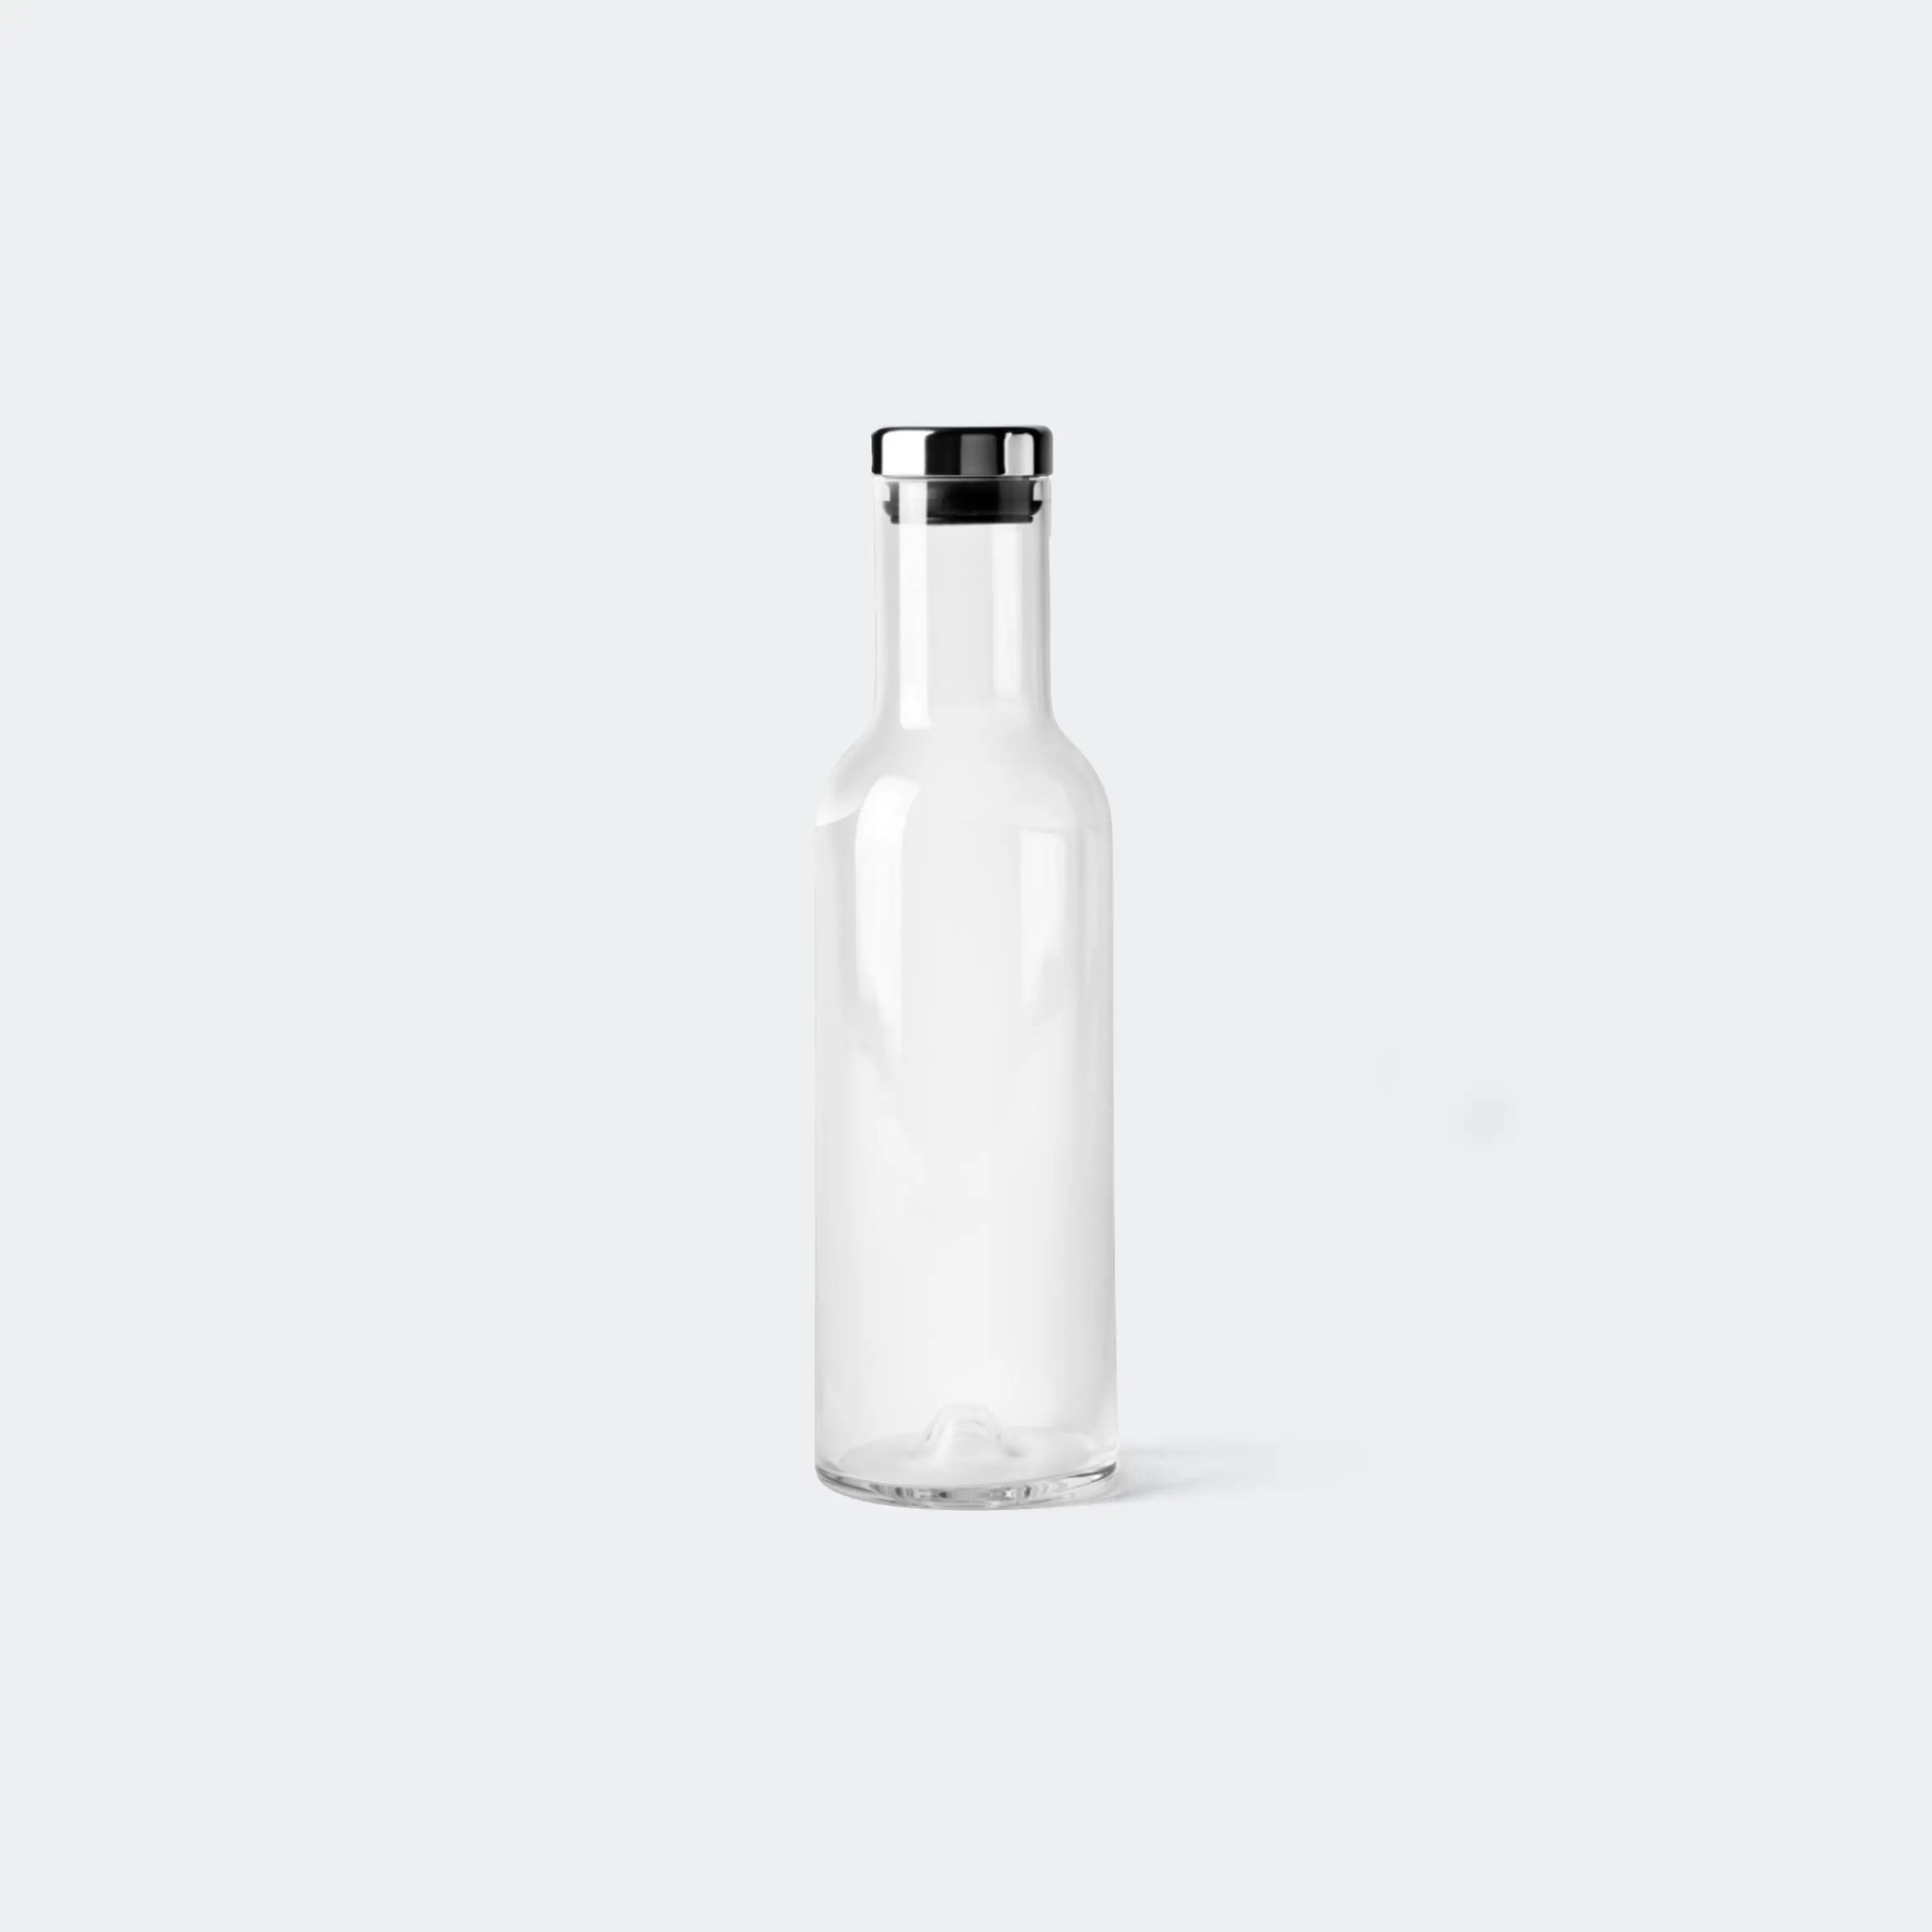 Audo Copenhagen Bottle Carafe with Stainless Steel Lid - KANSO